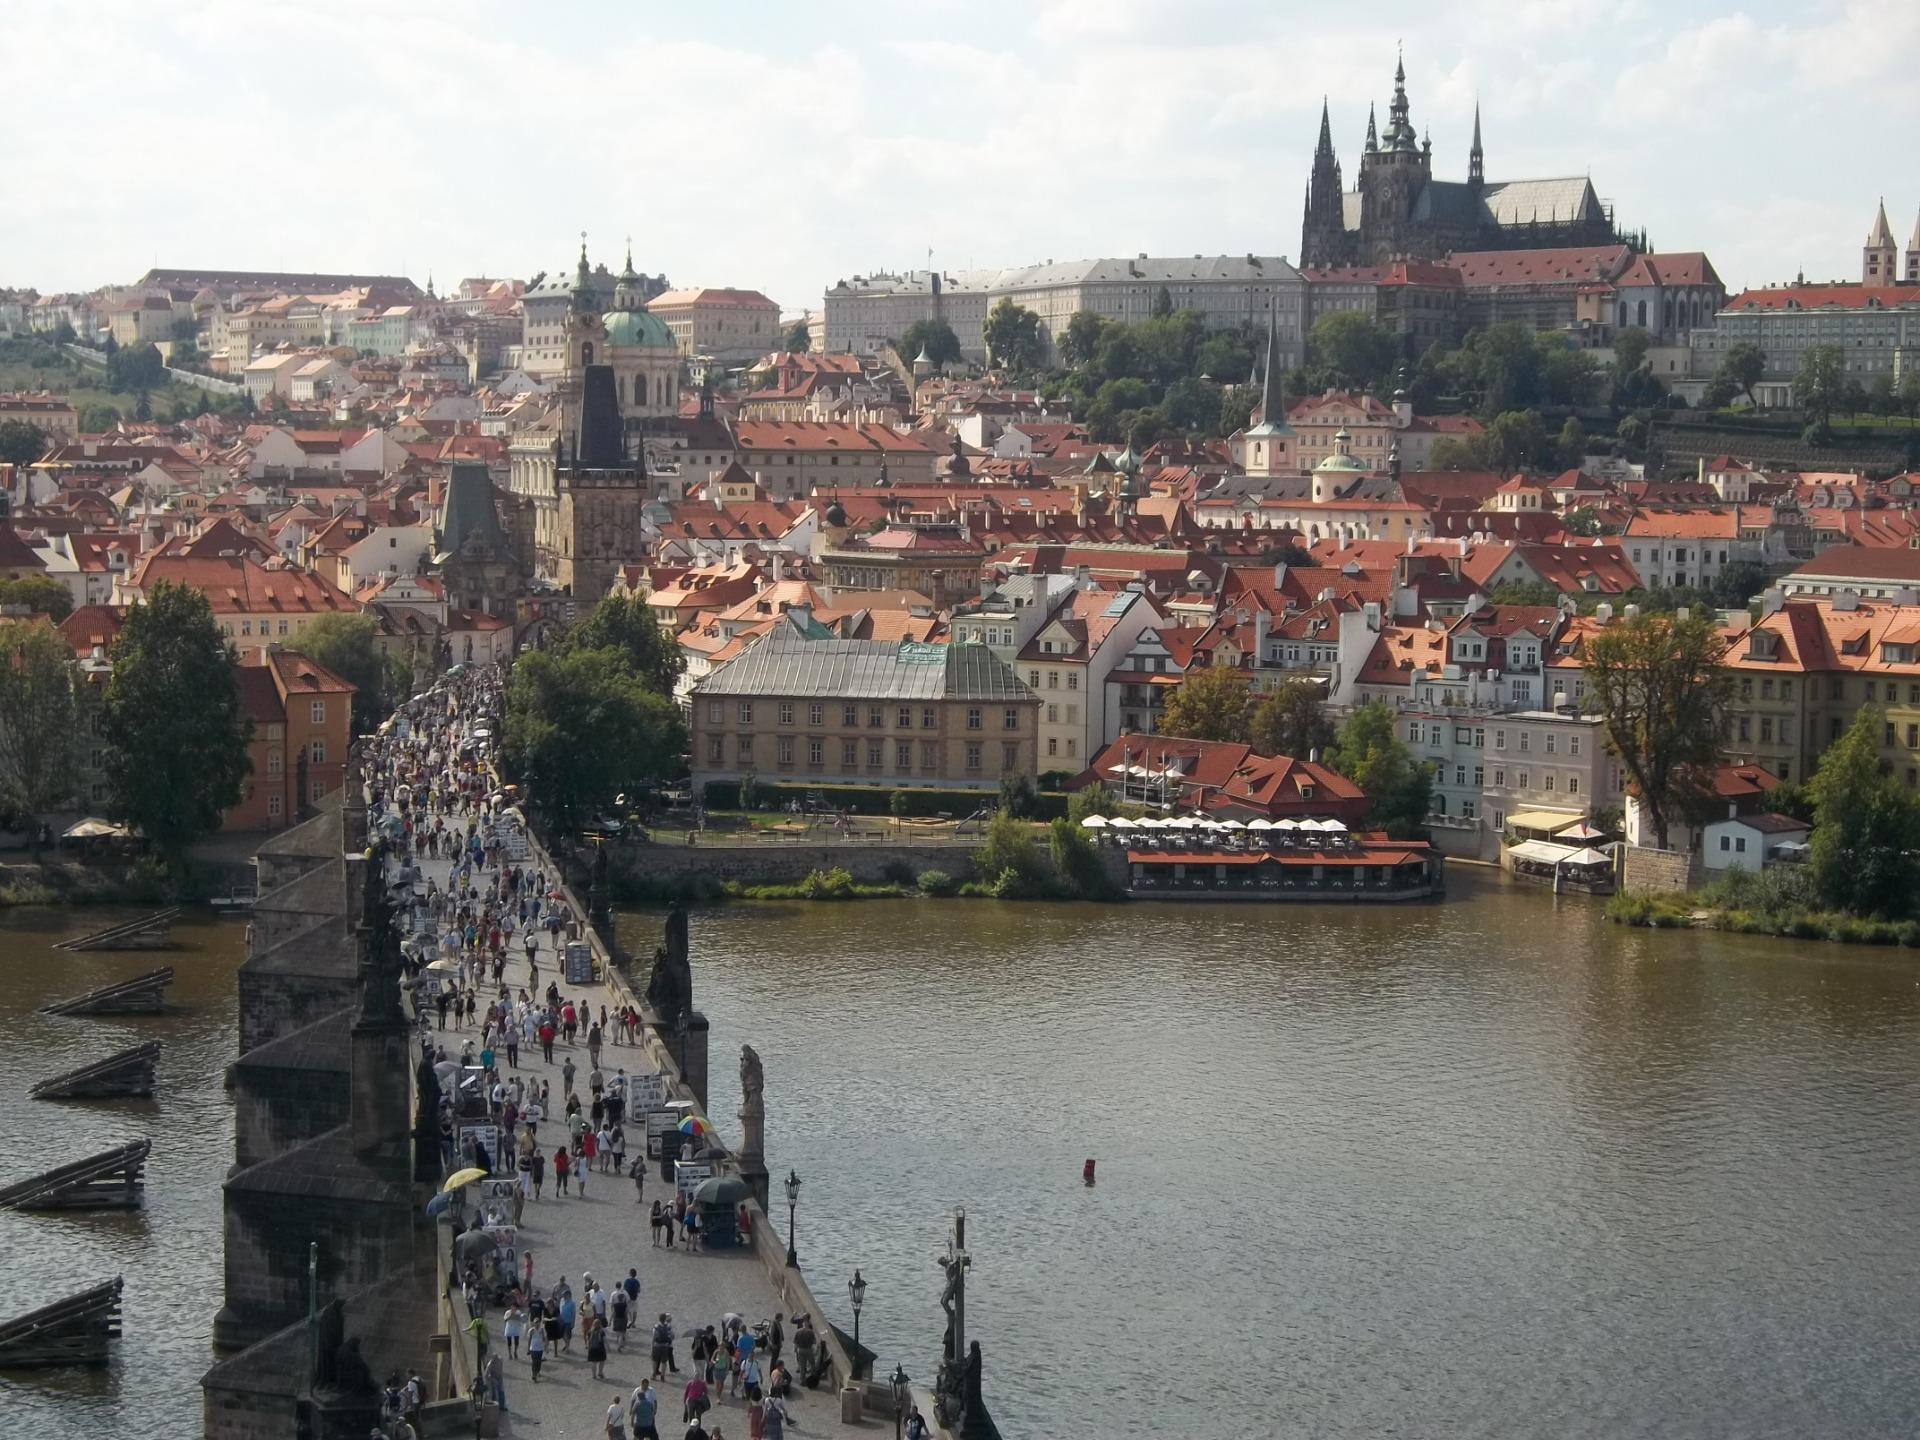 Private Tour by foot - Two days in Prague (2 x 4 hours)